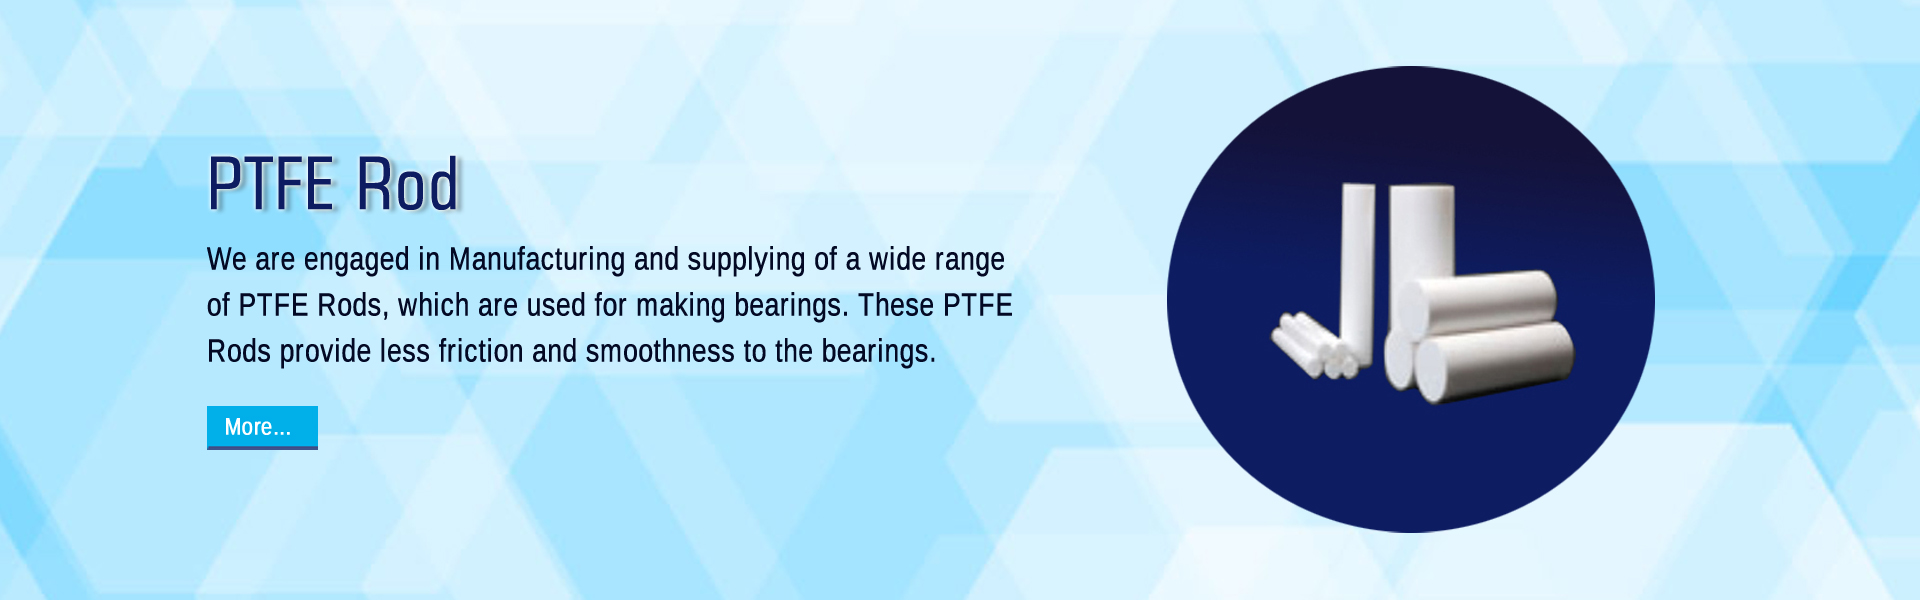 PTFE Spare Parts, Manufacturer, Supplier from Ahmedabad,Gujarat-India.